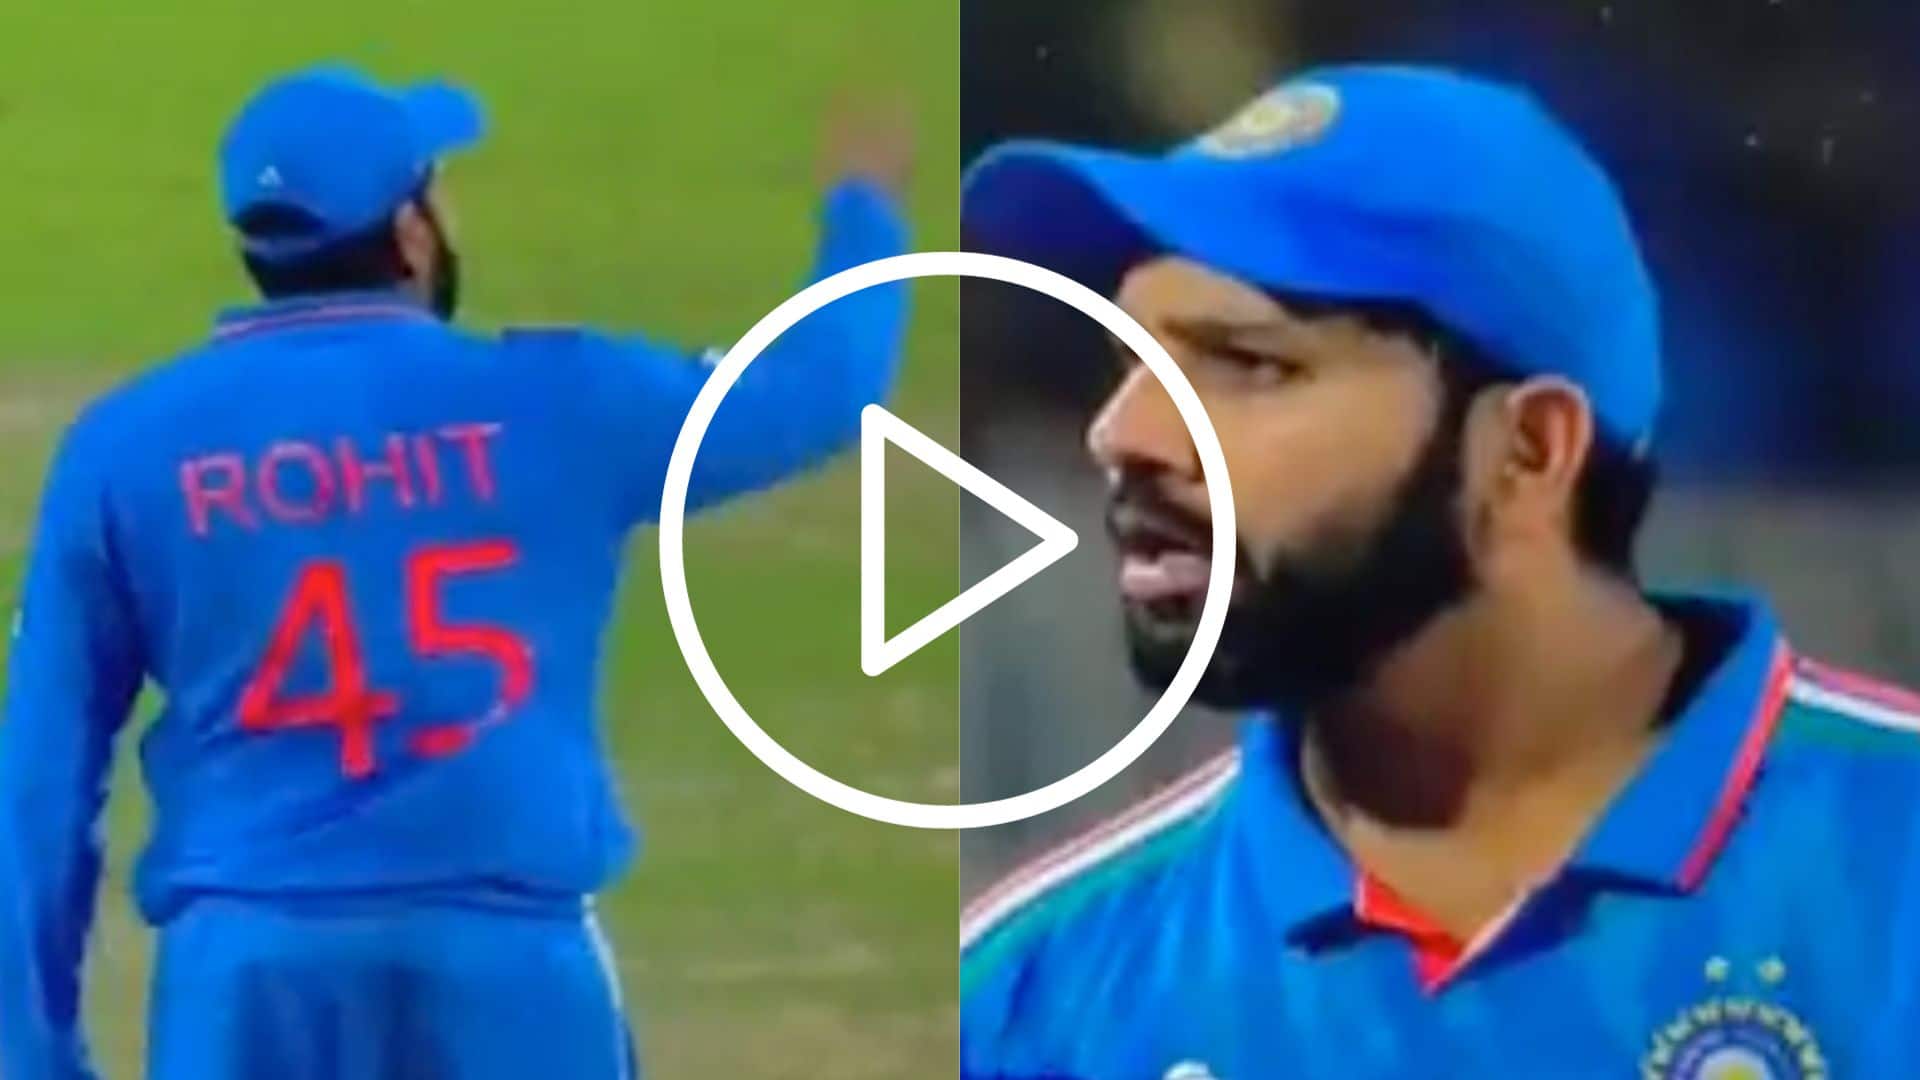 [Watch] Rohit Sharma ‘Blatantly Abusing’ Over-Excited Kuldeep Yadav Amidst DRS Chaos